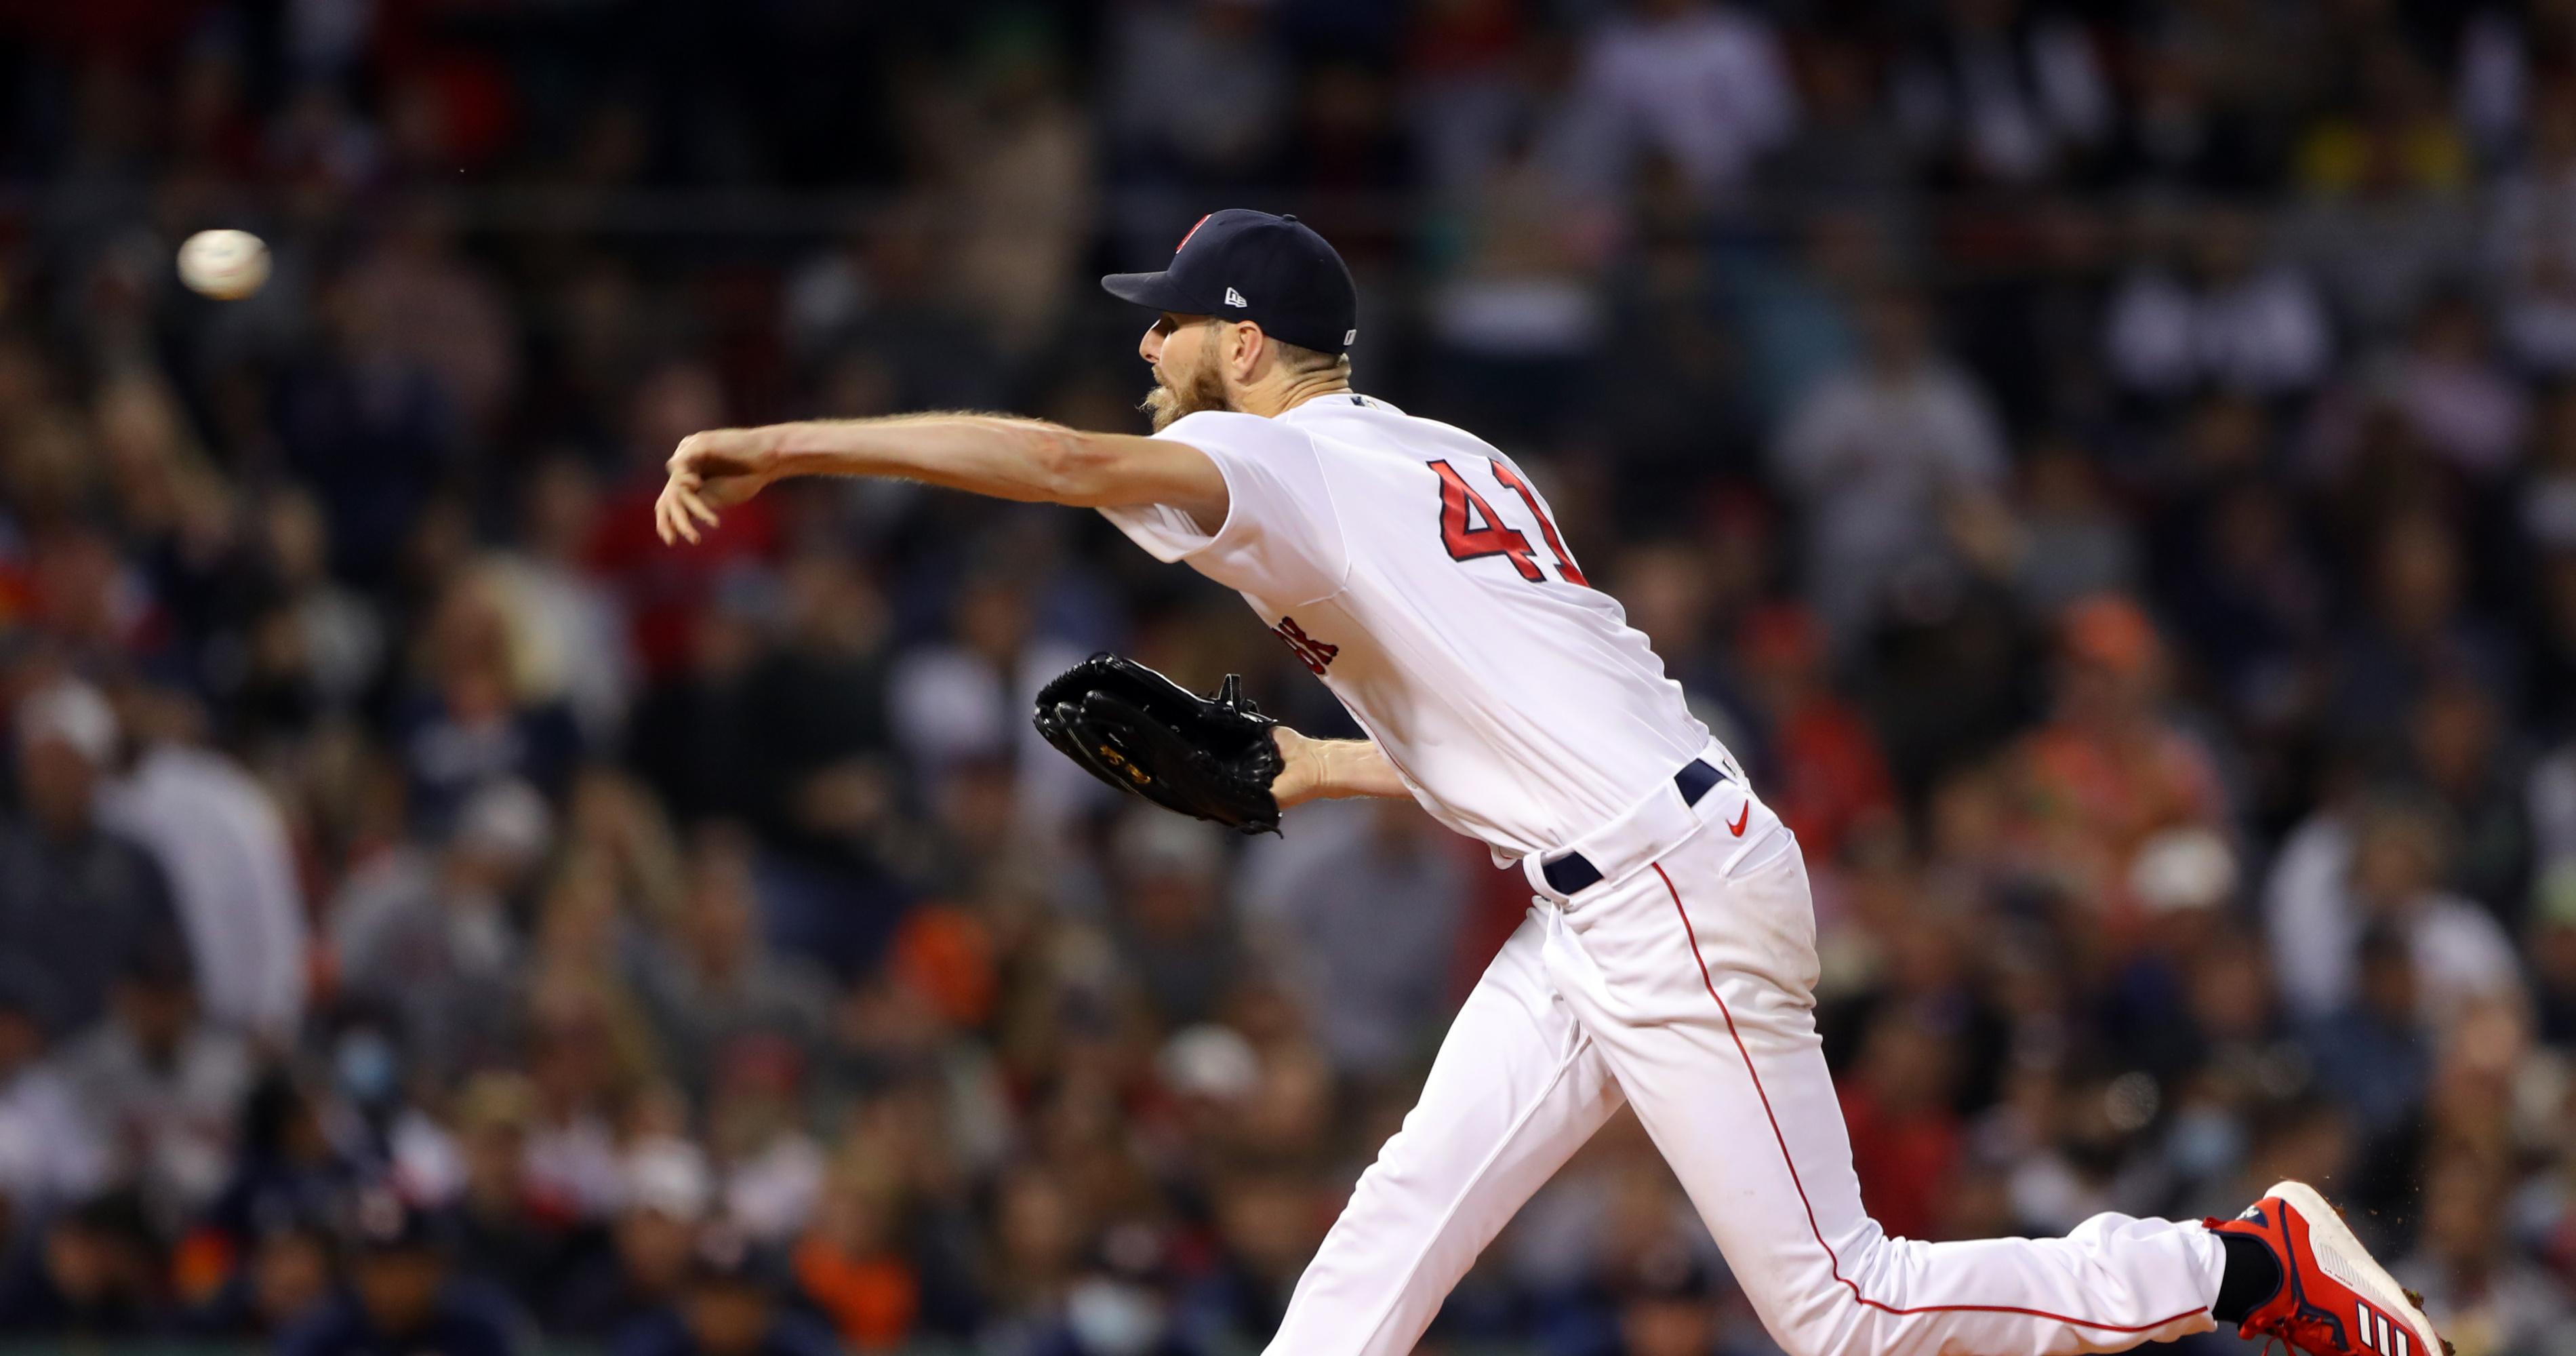 Chris Sale and his faulty elbow